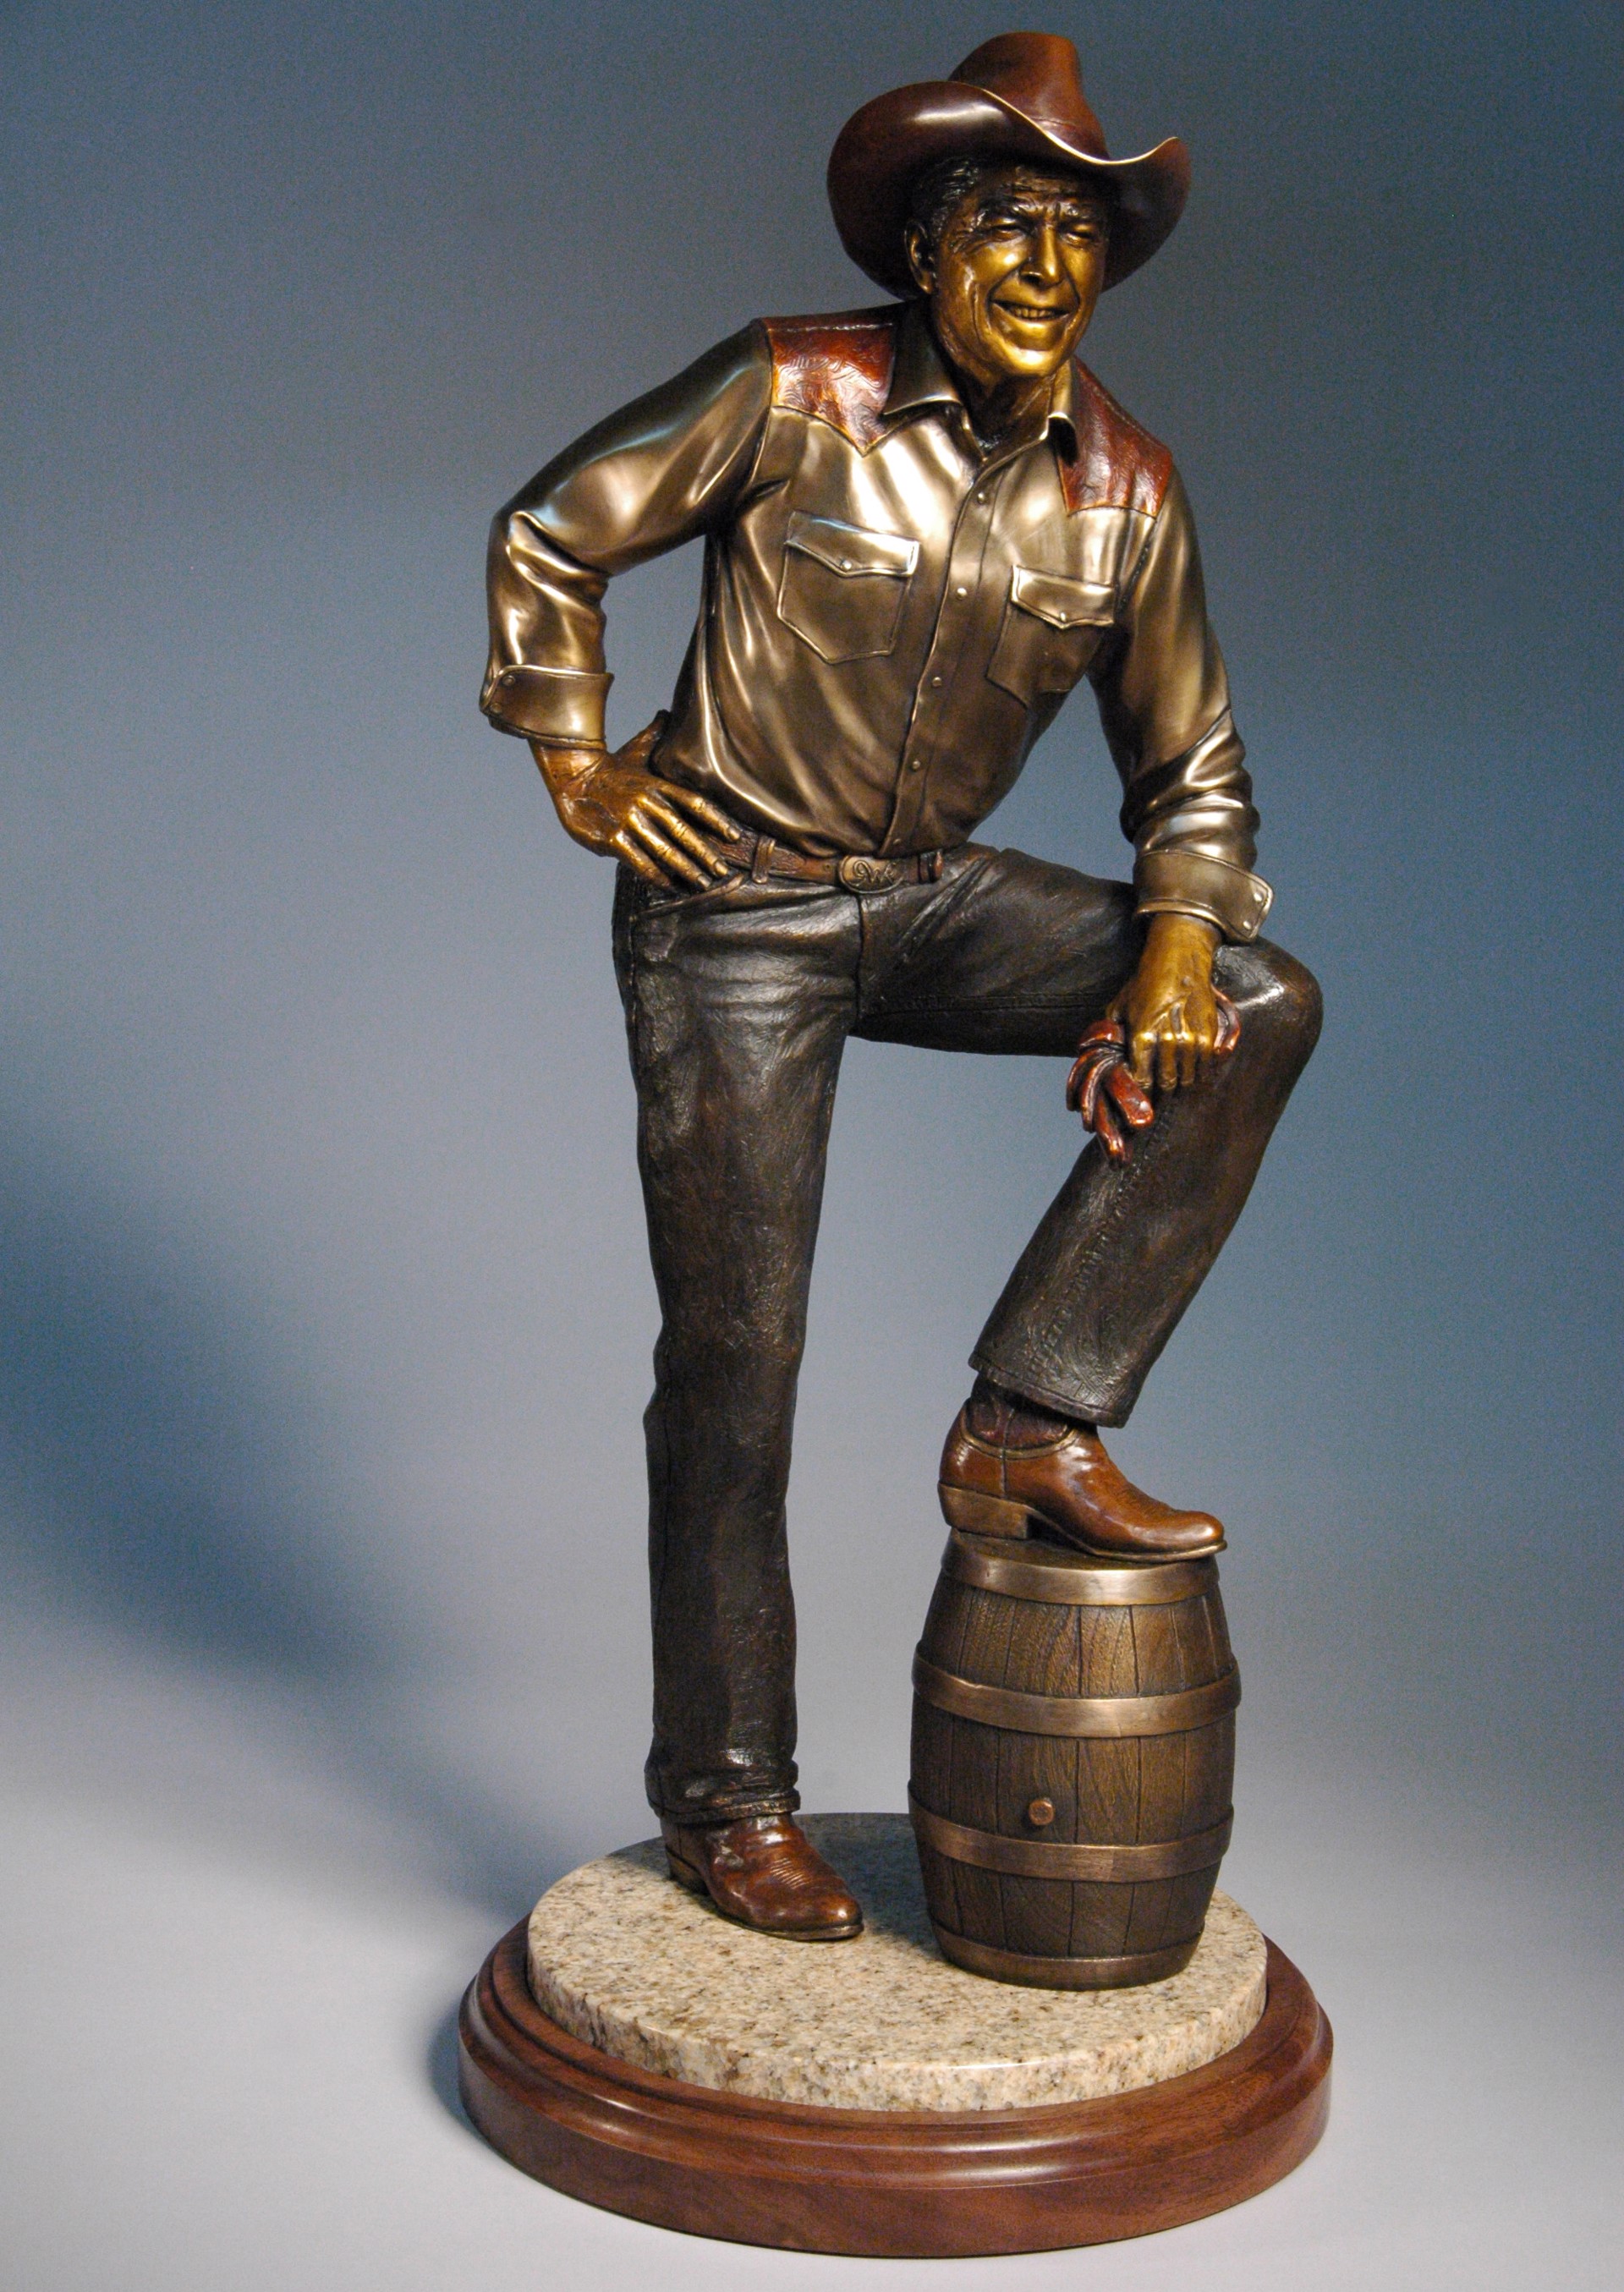 Ronald Reagan Maquette by George & Mark Lundeen